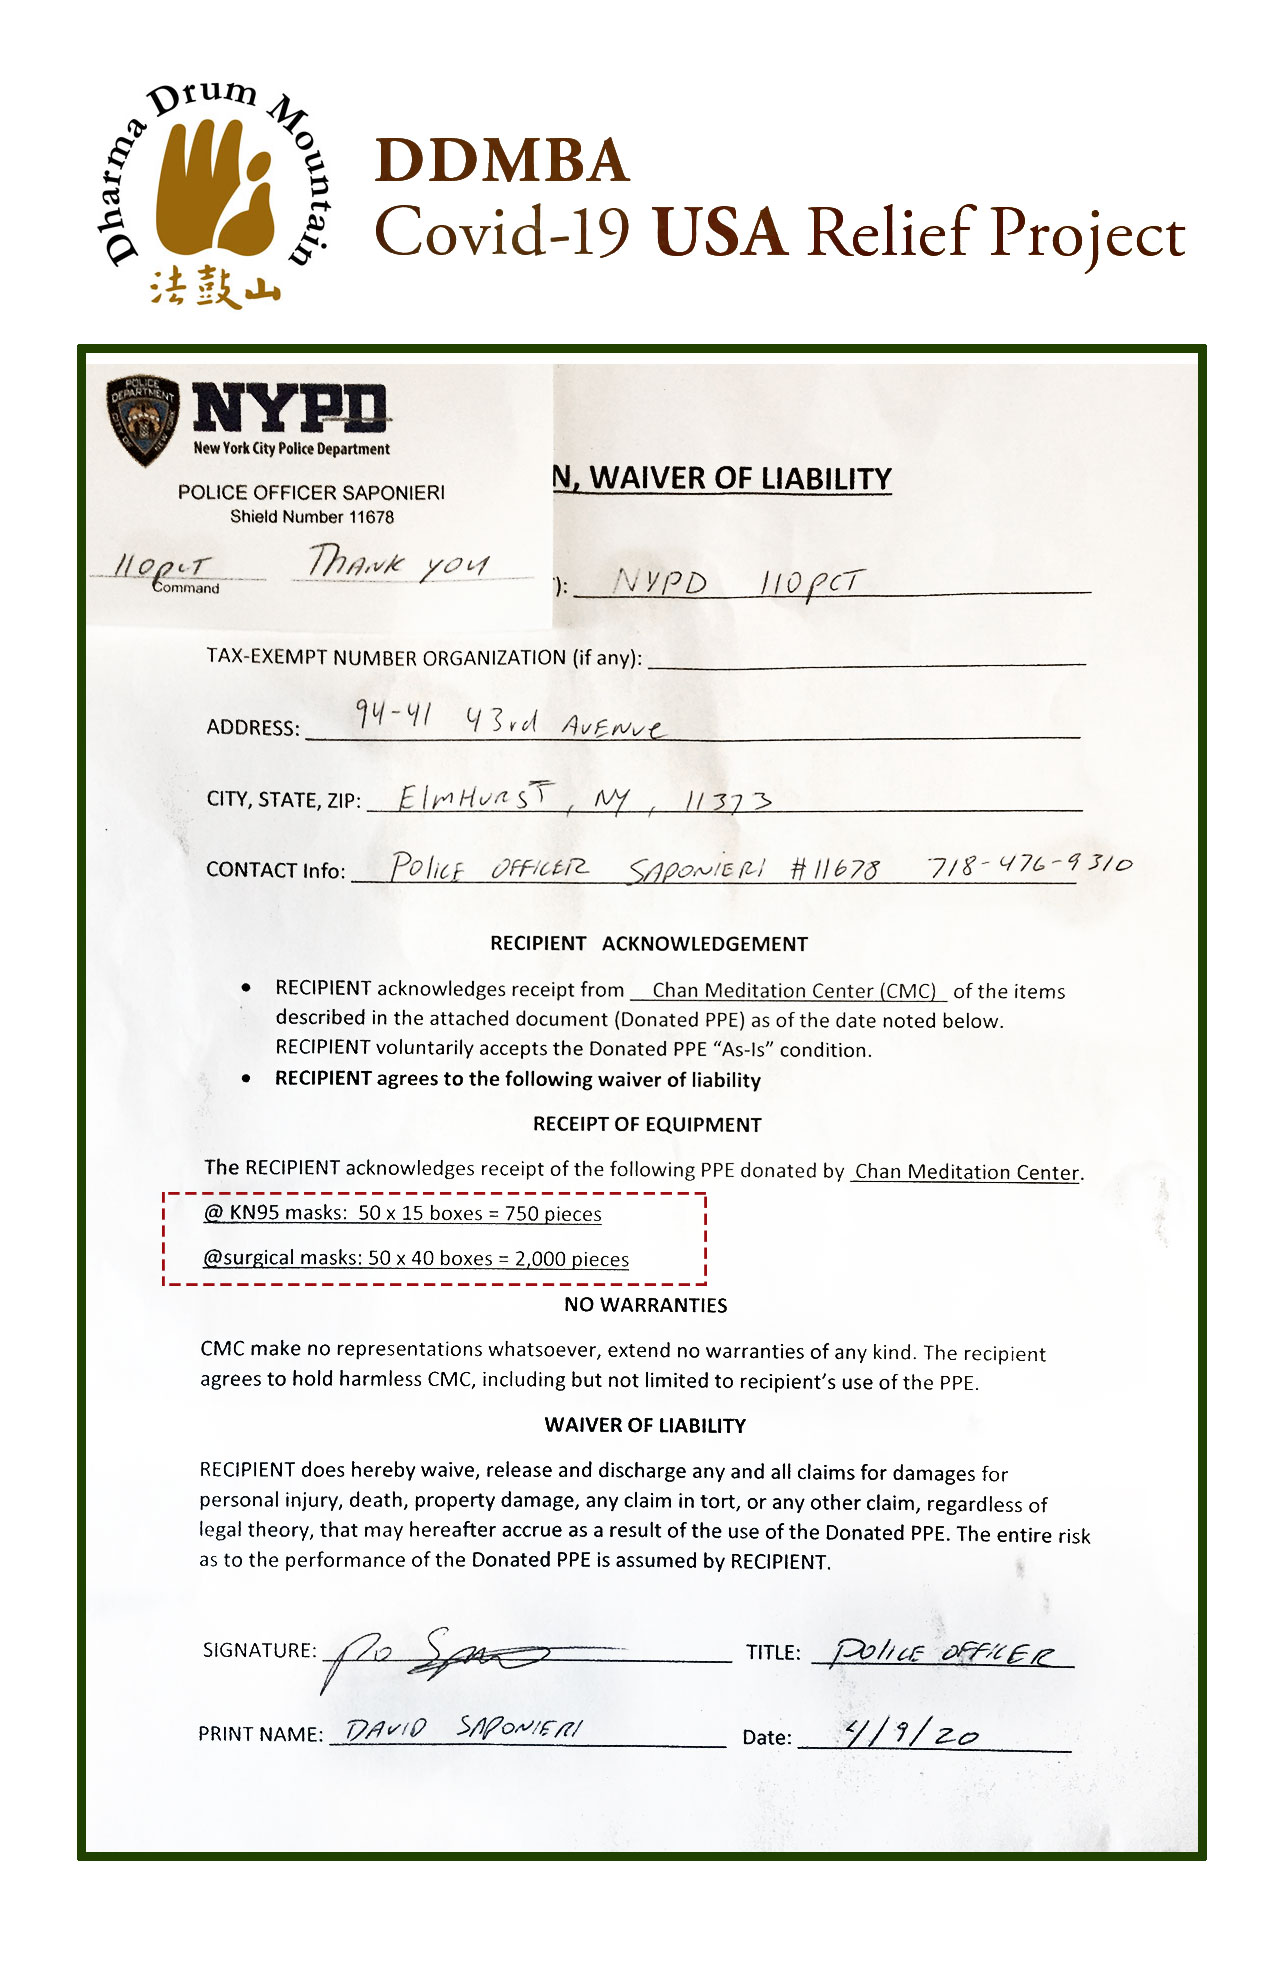 DDMBA USA COVID-19 Relief Project Delivery Report - New York - NYPD (110PCT Elmhurst)